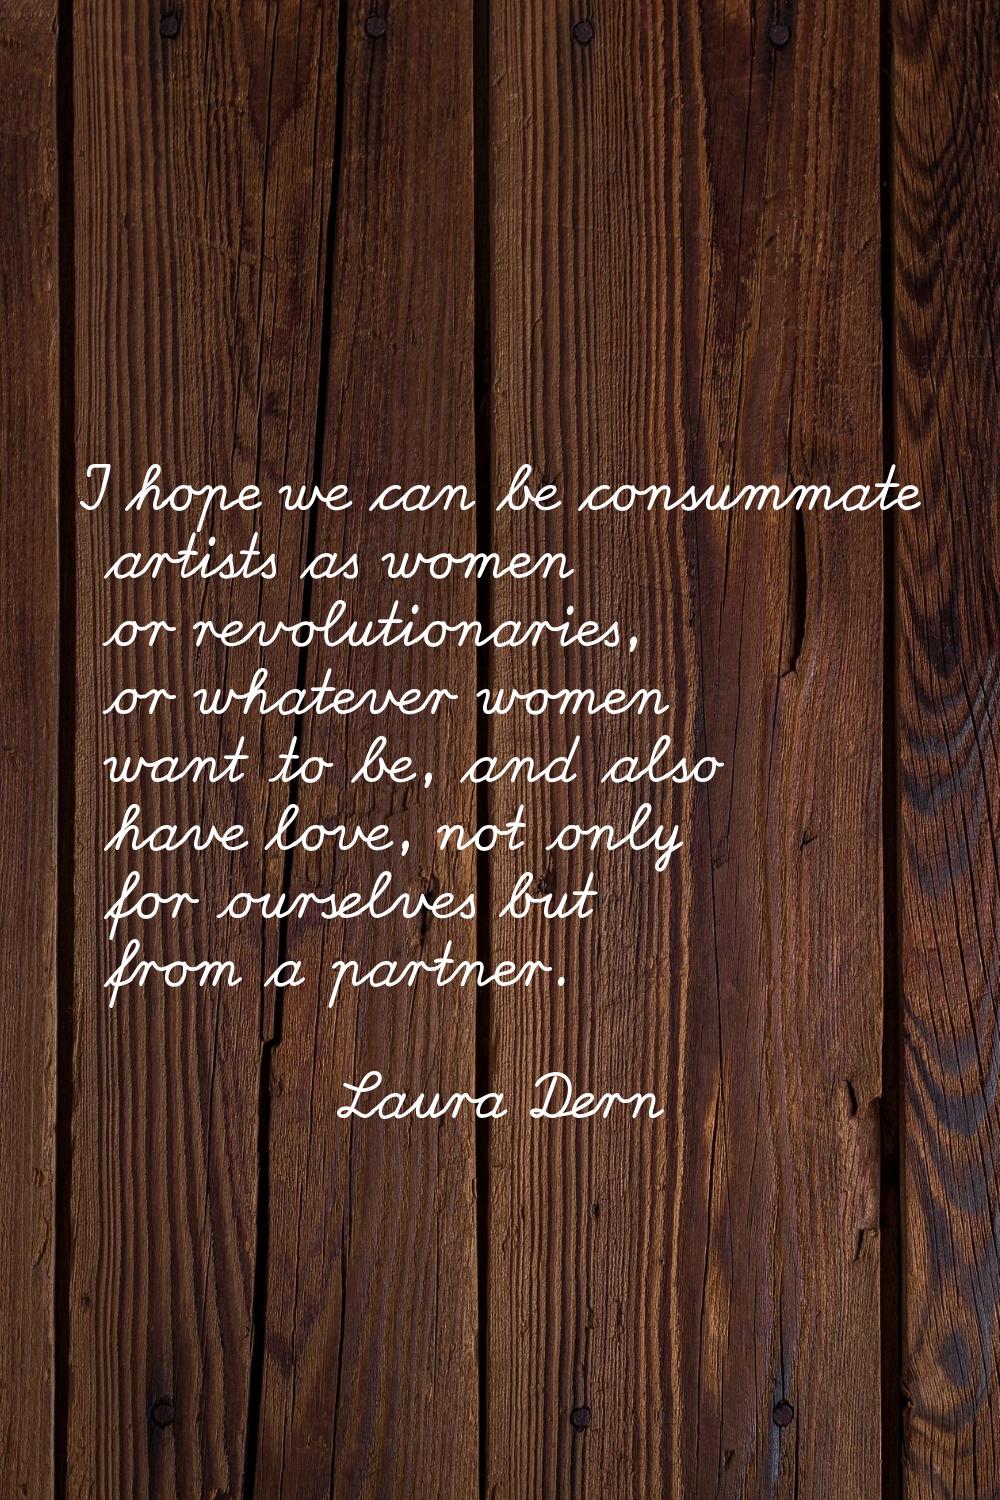 I hope we can be consummate artists as women or revolutionaries, or whatever women want to be, and 